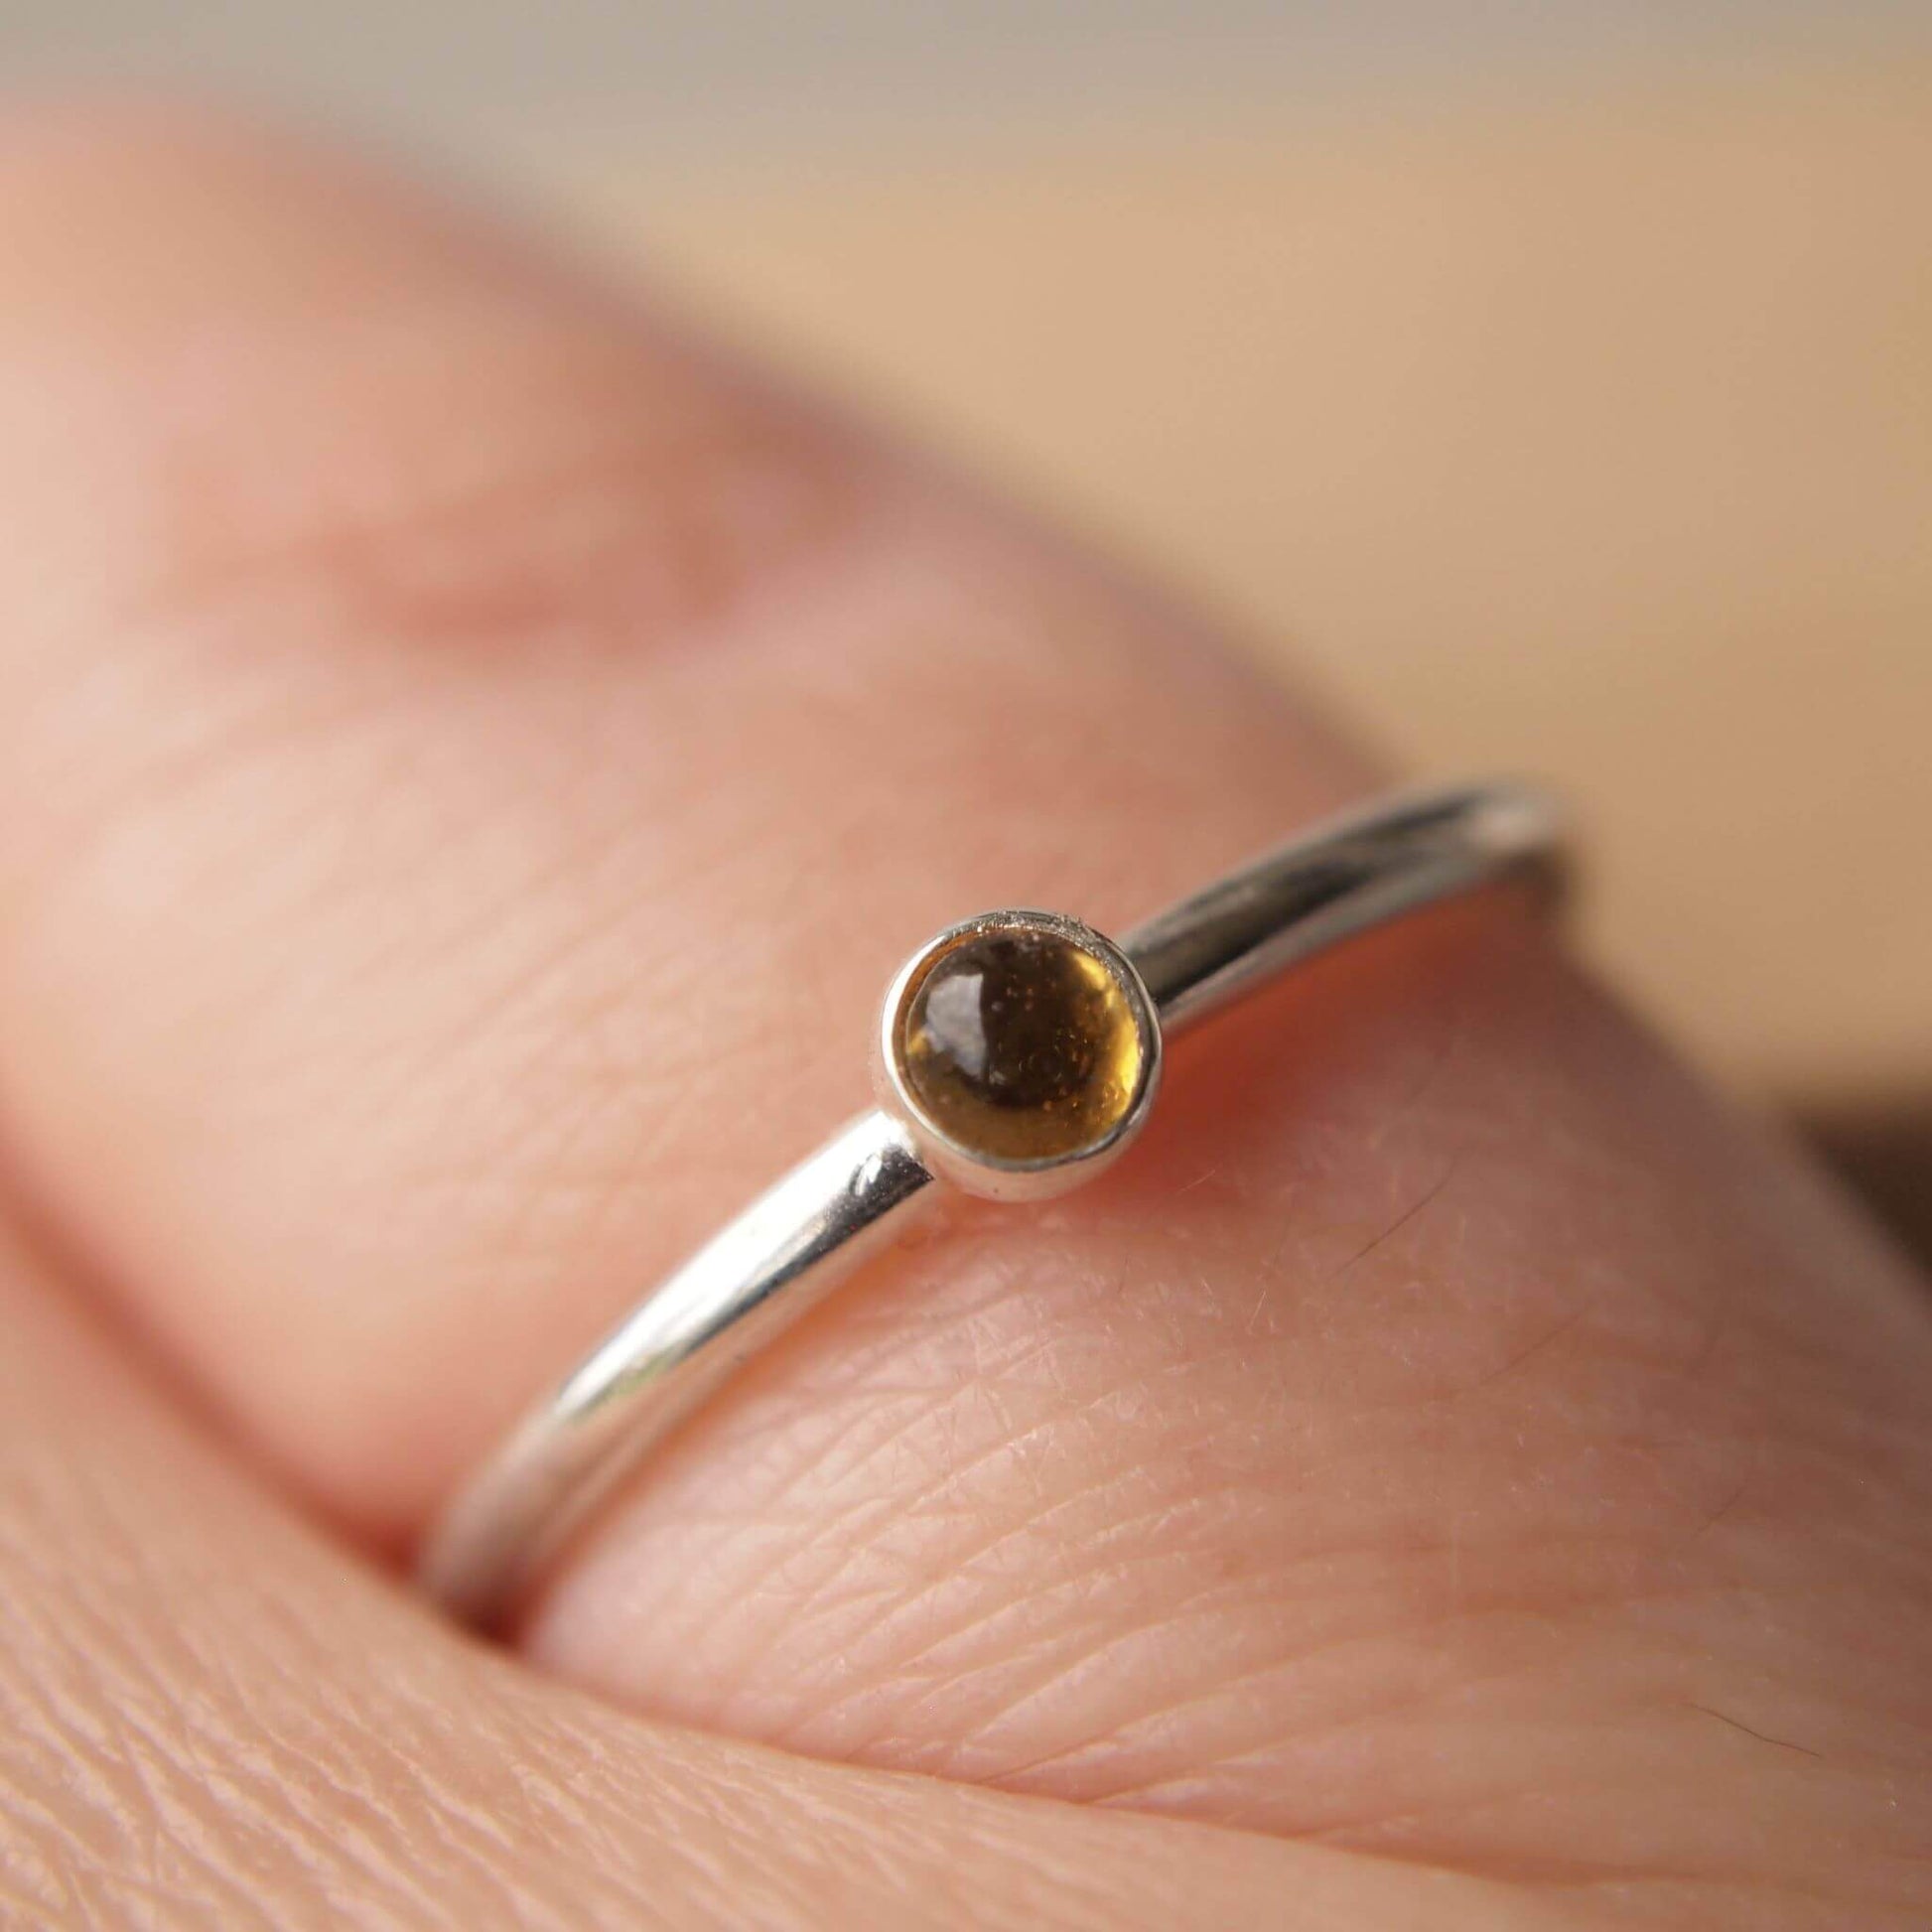 Citrine and Sterling Silver Ring made from a small 3mm round warm yellow citrine gemstone set simply onto a modern band of fully round wire. Handmade to your ring size by maram jewellery in Scotland